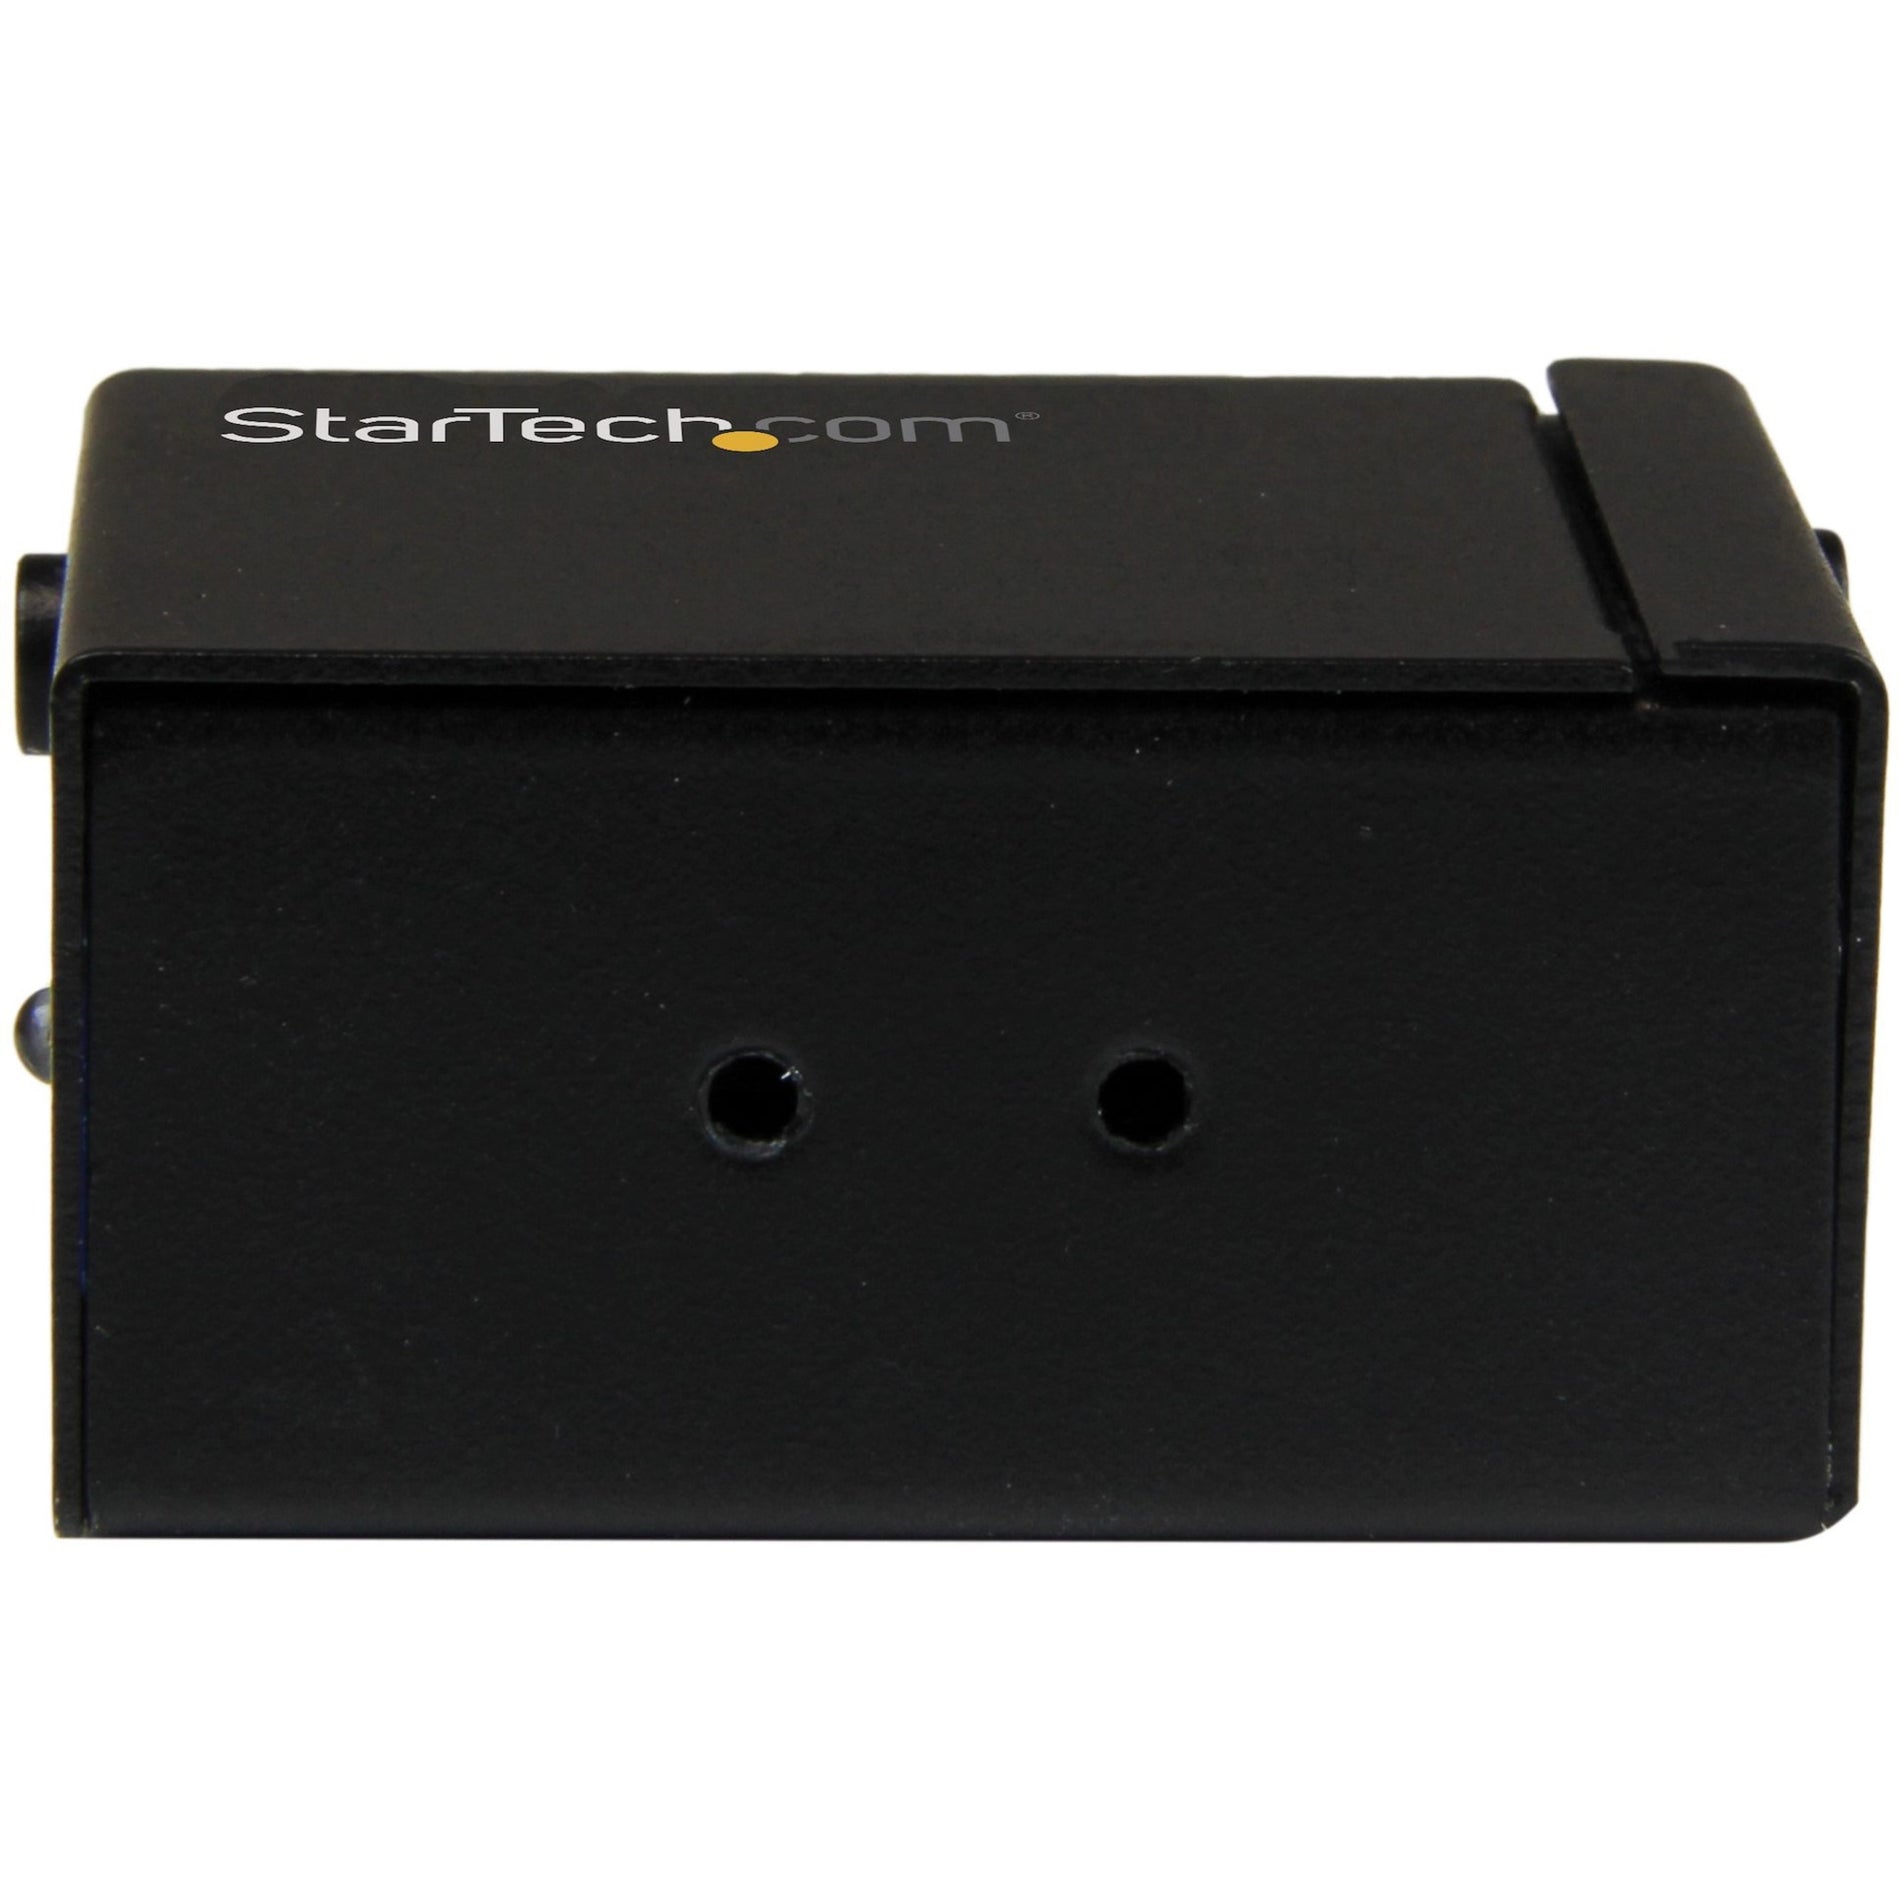 StarTech.com HDBOOST HDMI Signal Booster - Enhance Your HDMI Video Signal for 115 ft, 1080p Resolution